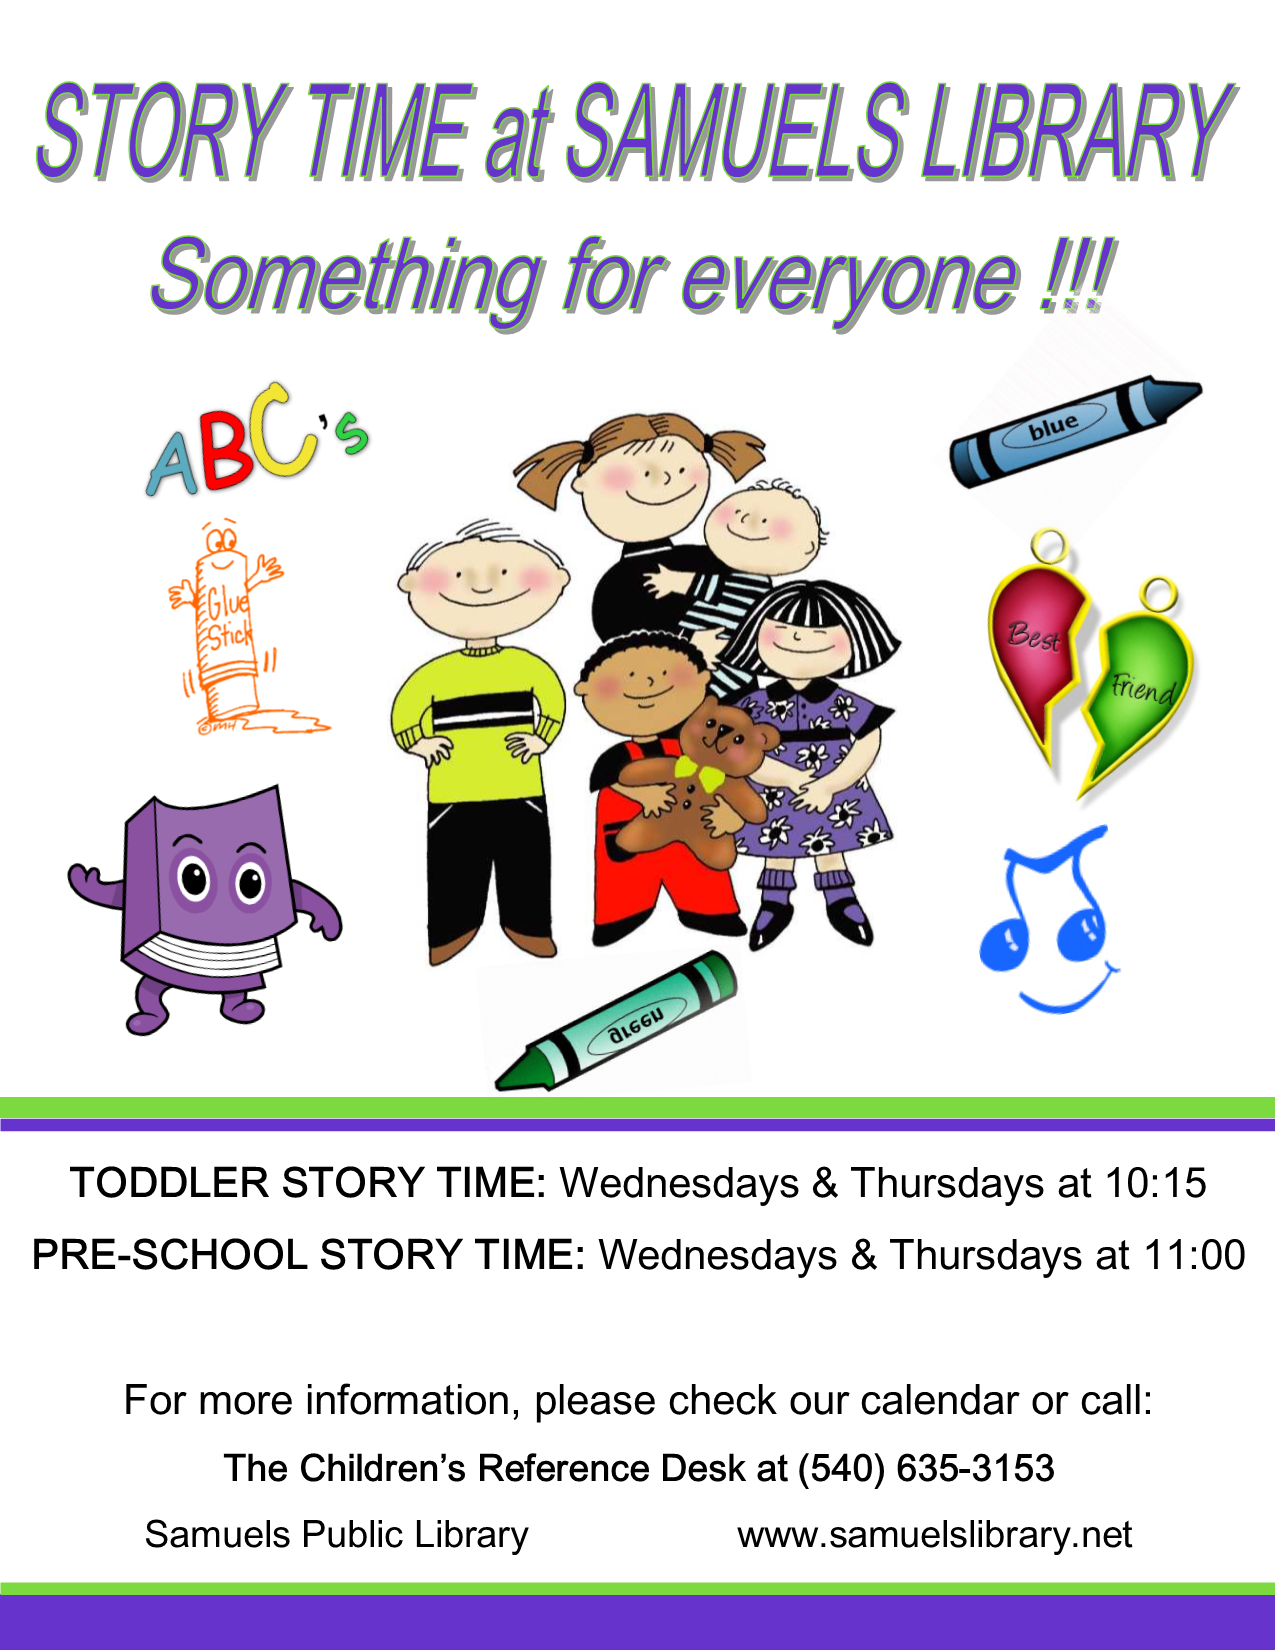 Toddler story time meets at 10:15 on Wednesdays and Thursdays.